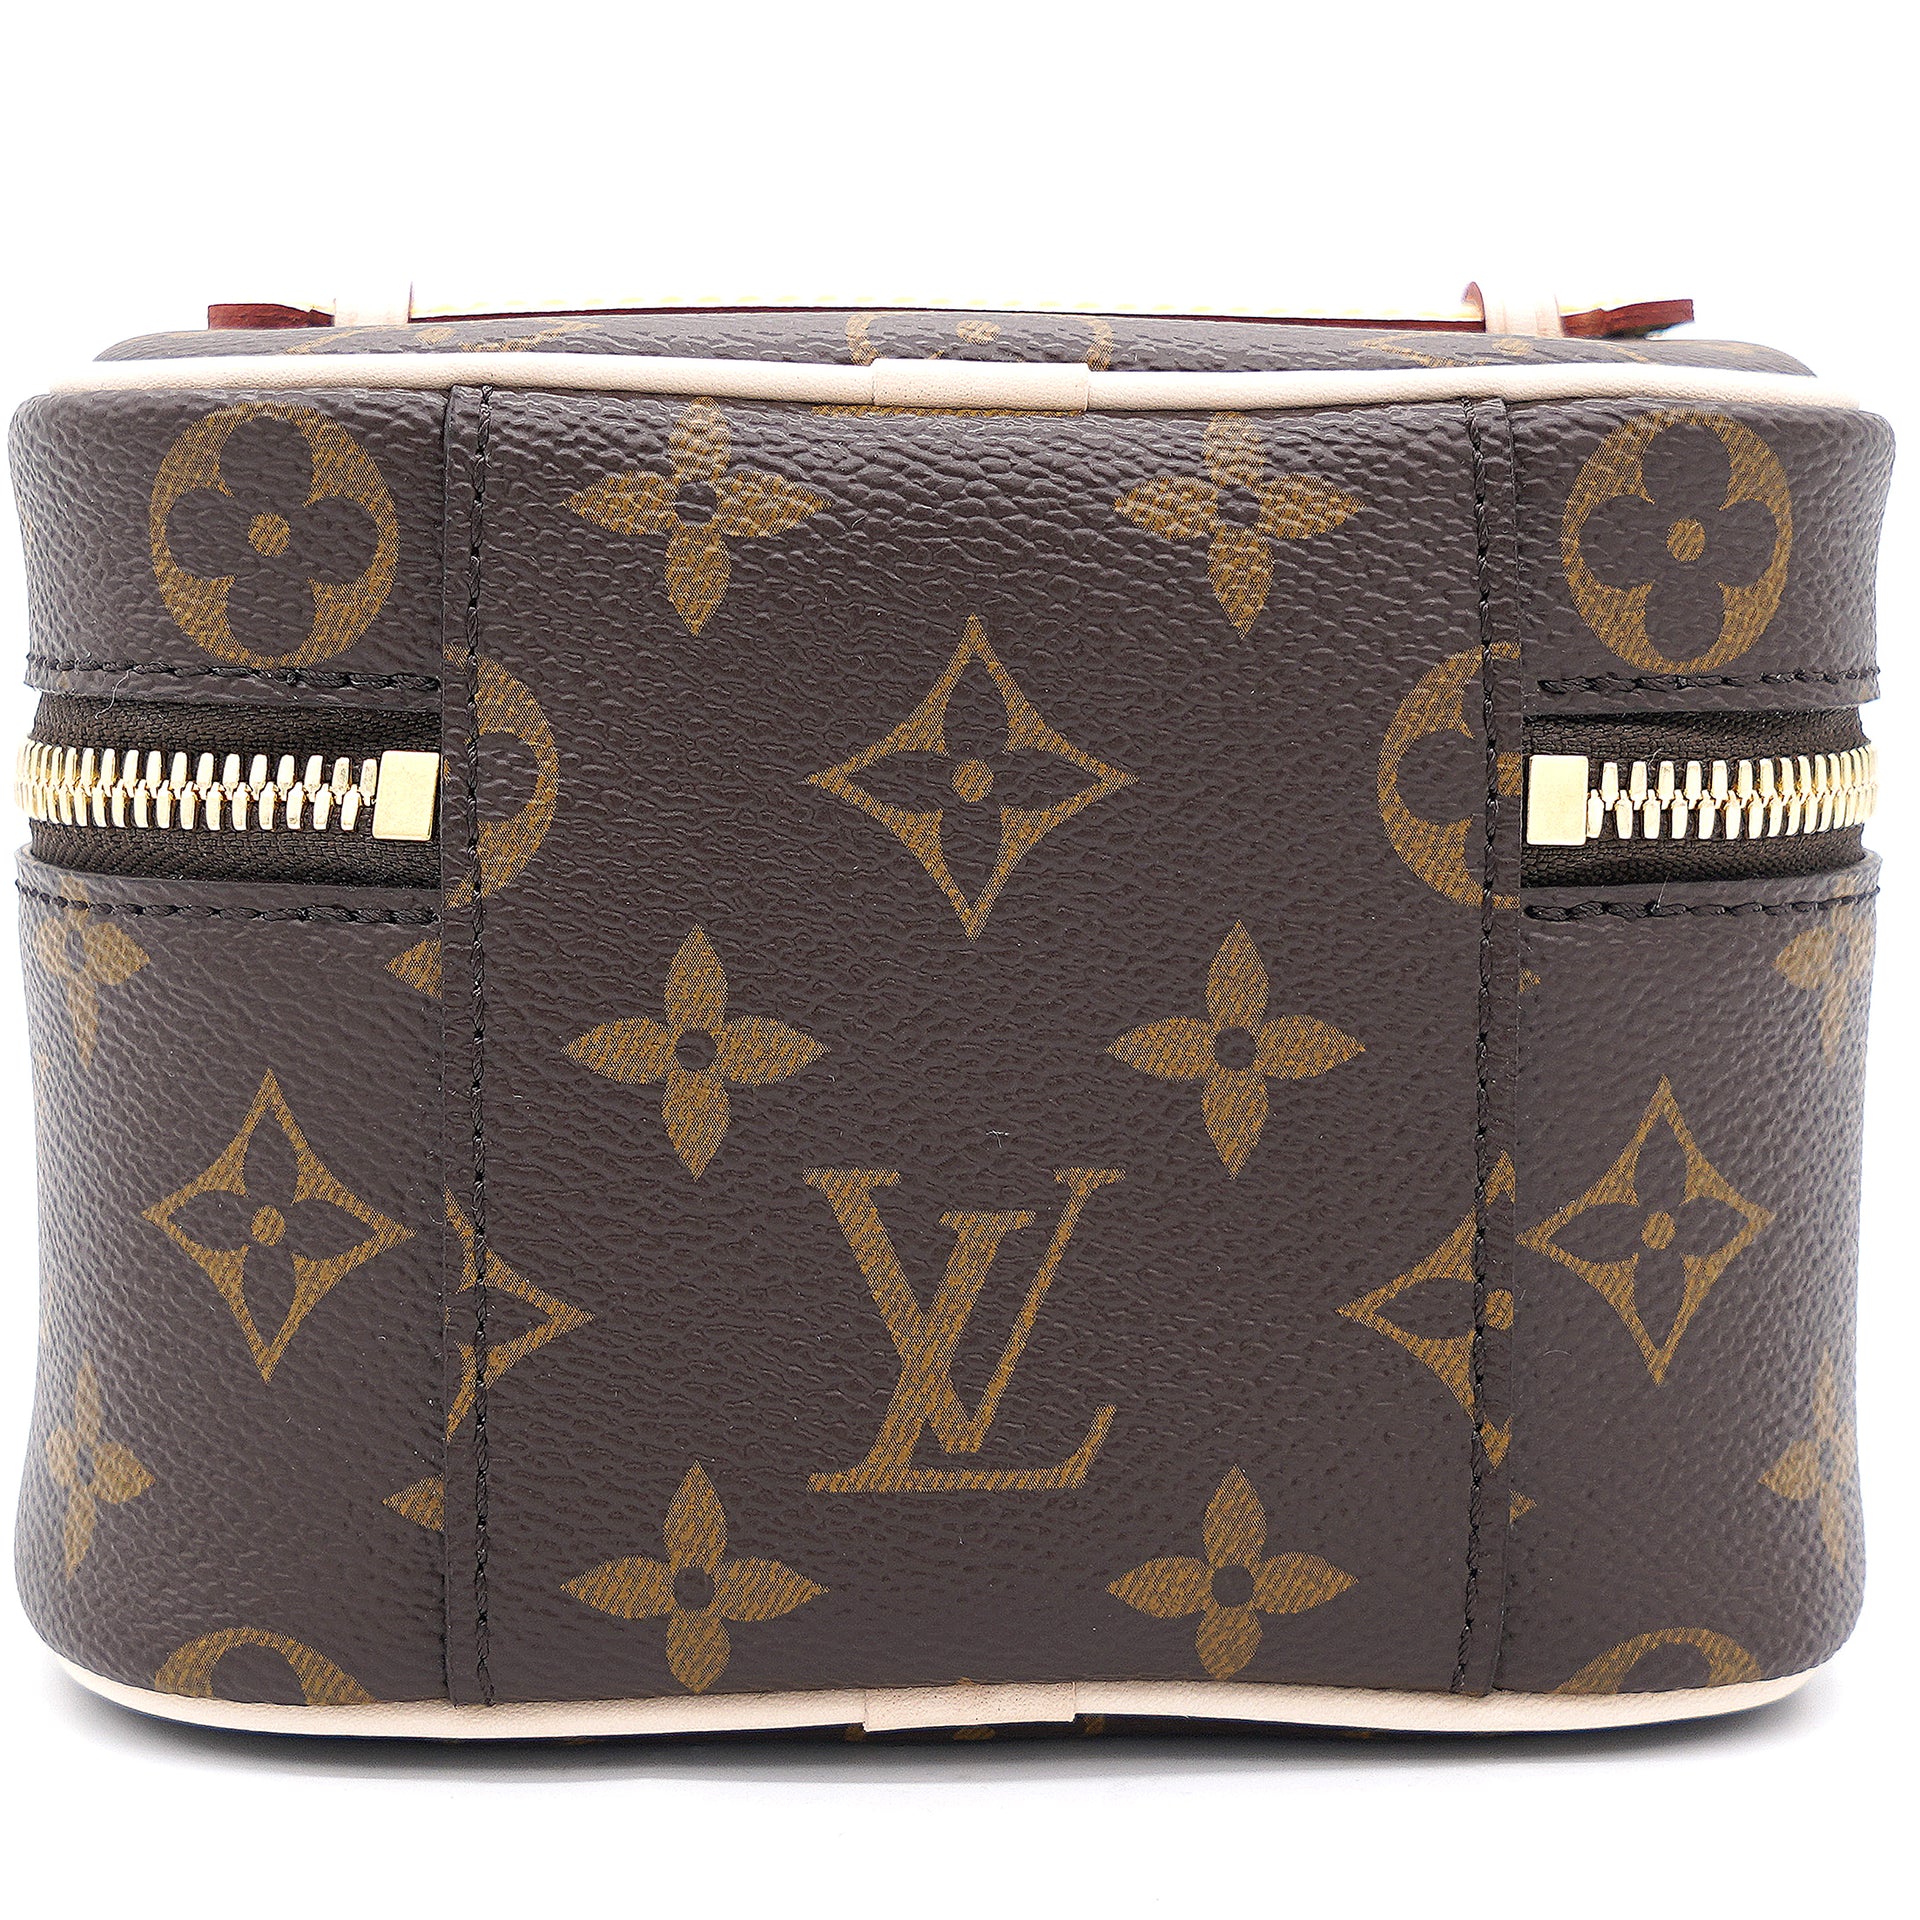 LOUIS VUITTON MINI POCHETTE VS NICE NANO // What Fits Inside & Different  Ways To Use It~ Luxury SLG 